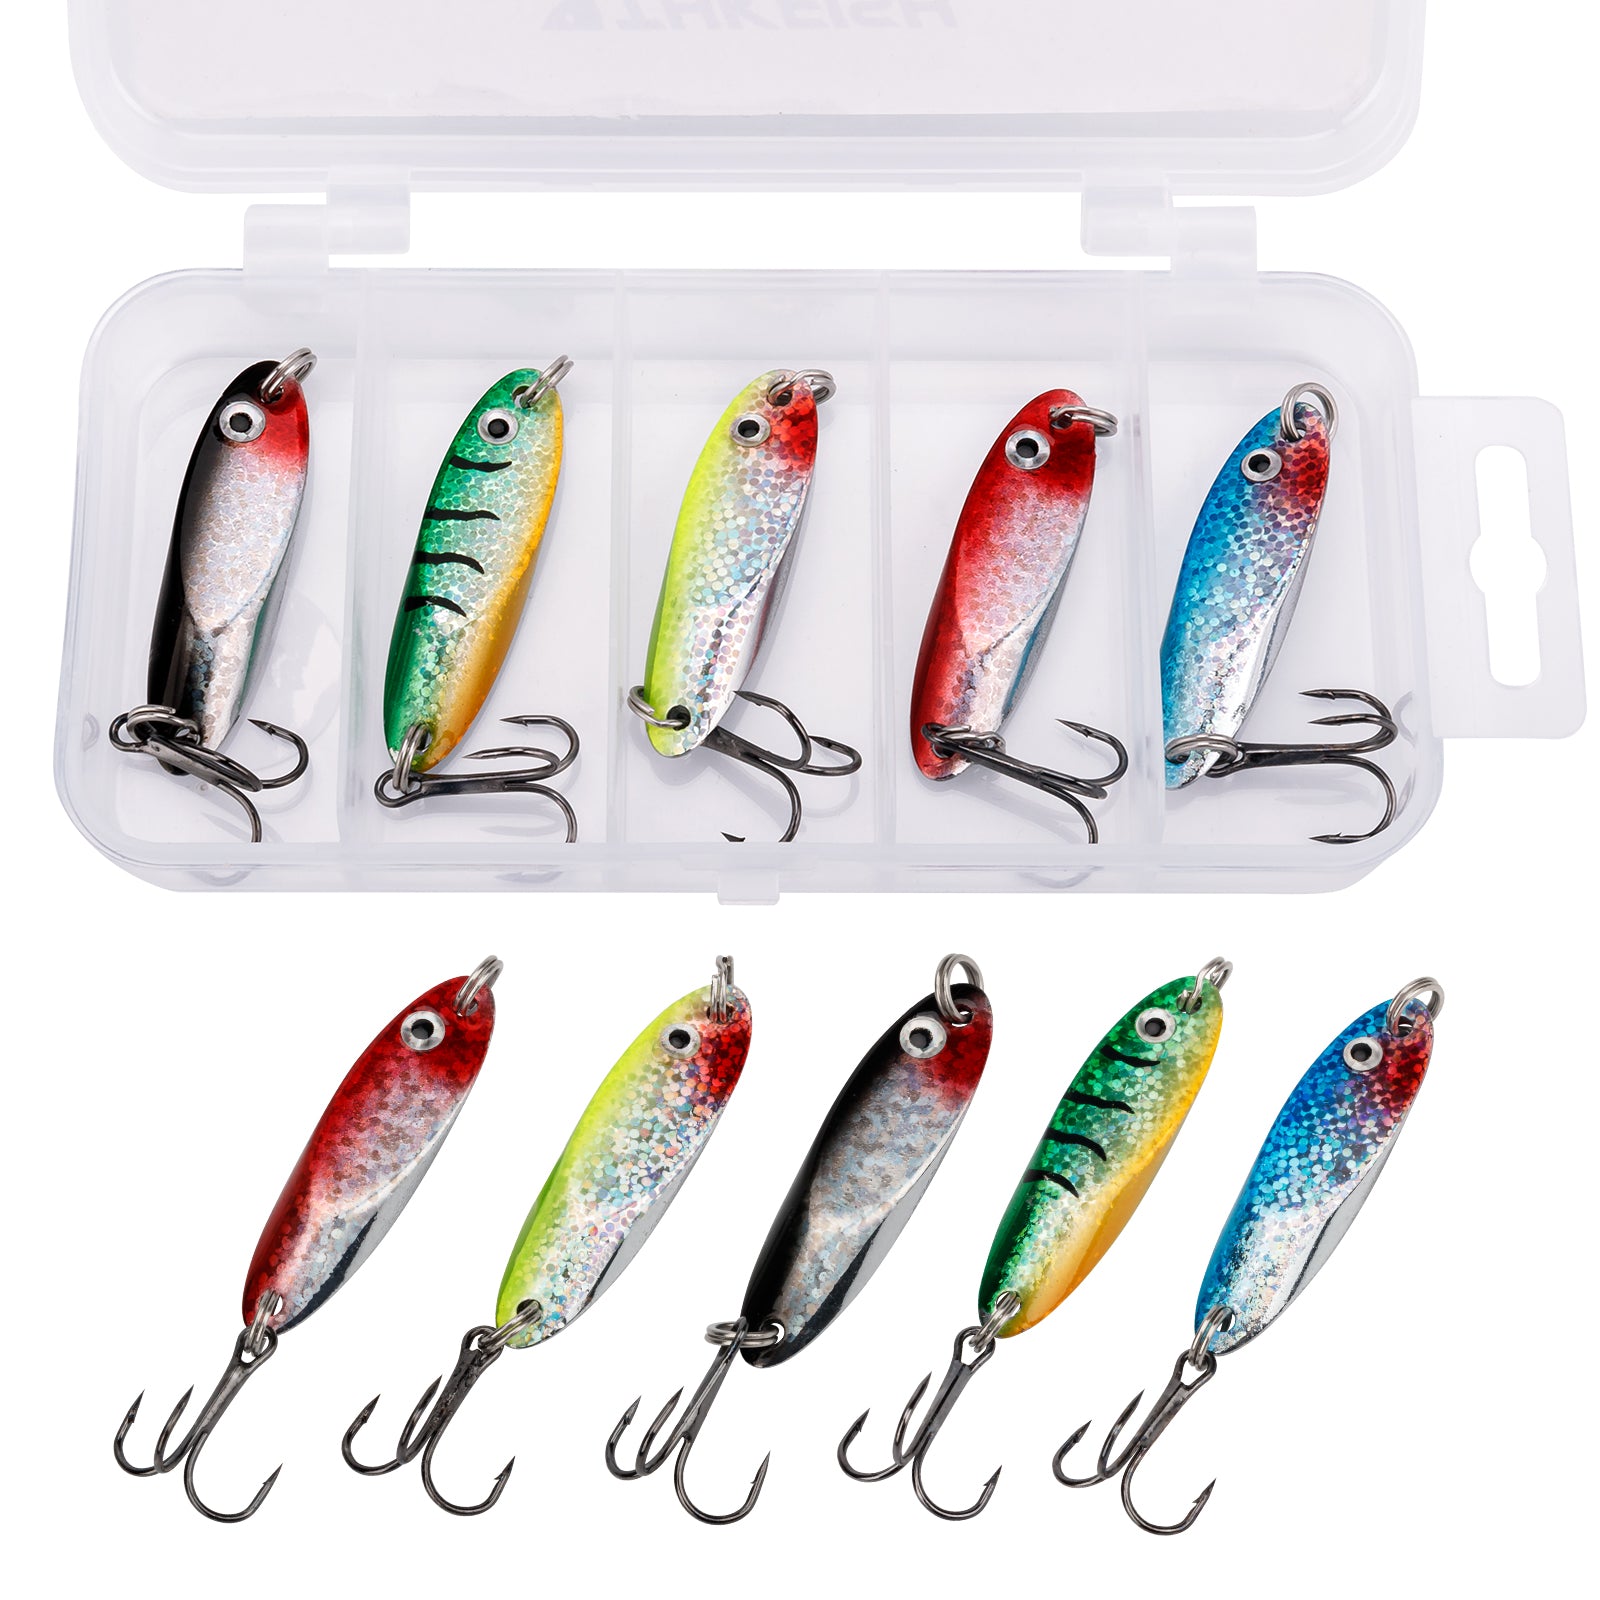 THKFISH Saltwater Trout Fishing Spoons Lures - 5pcs